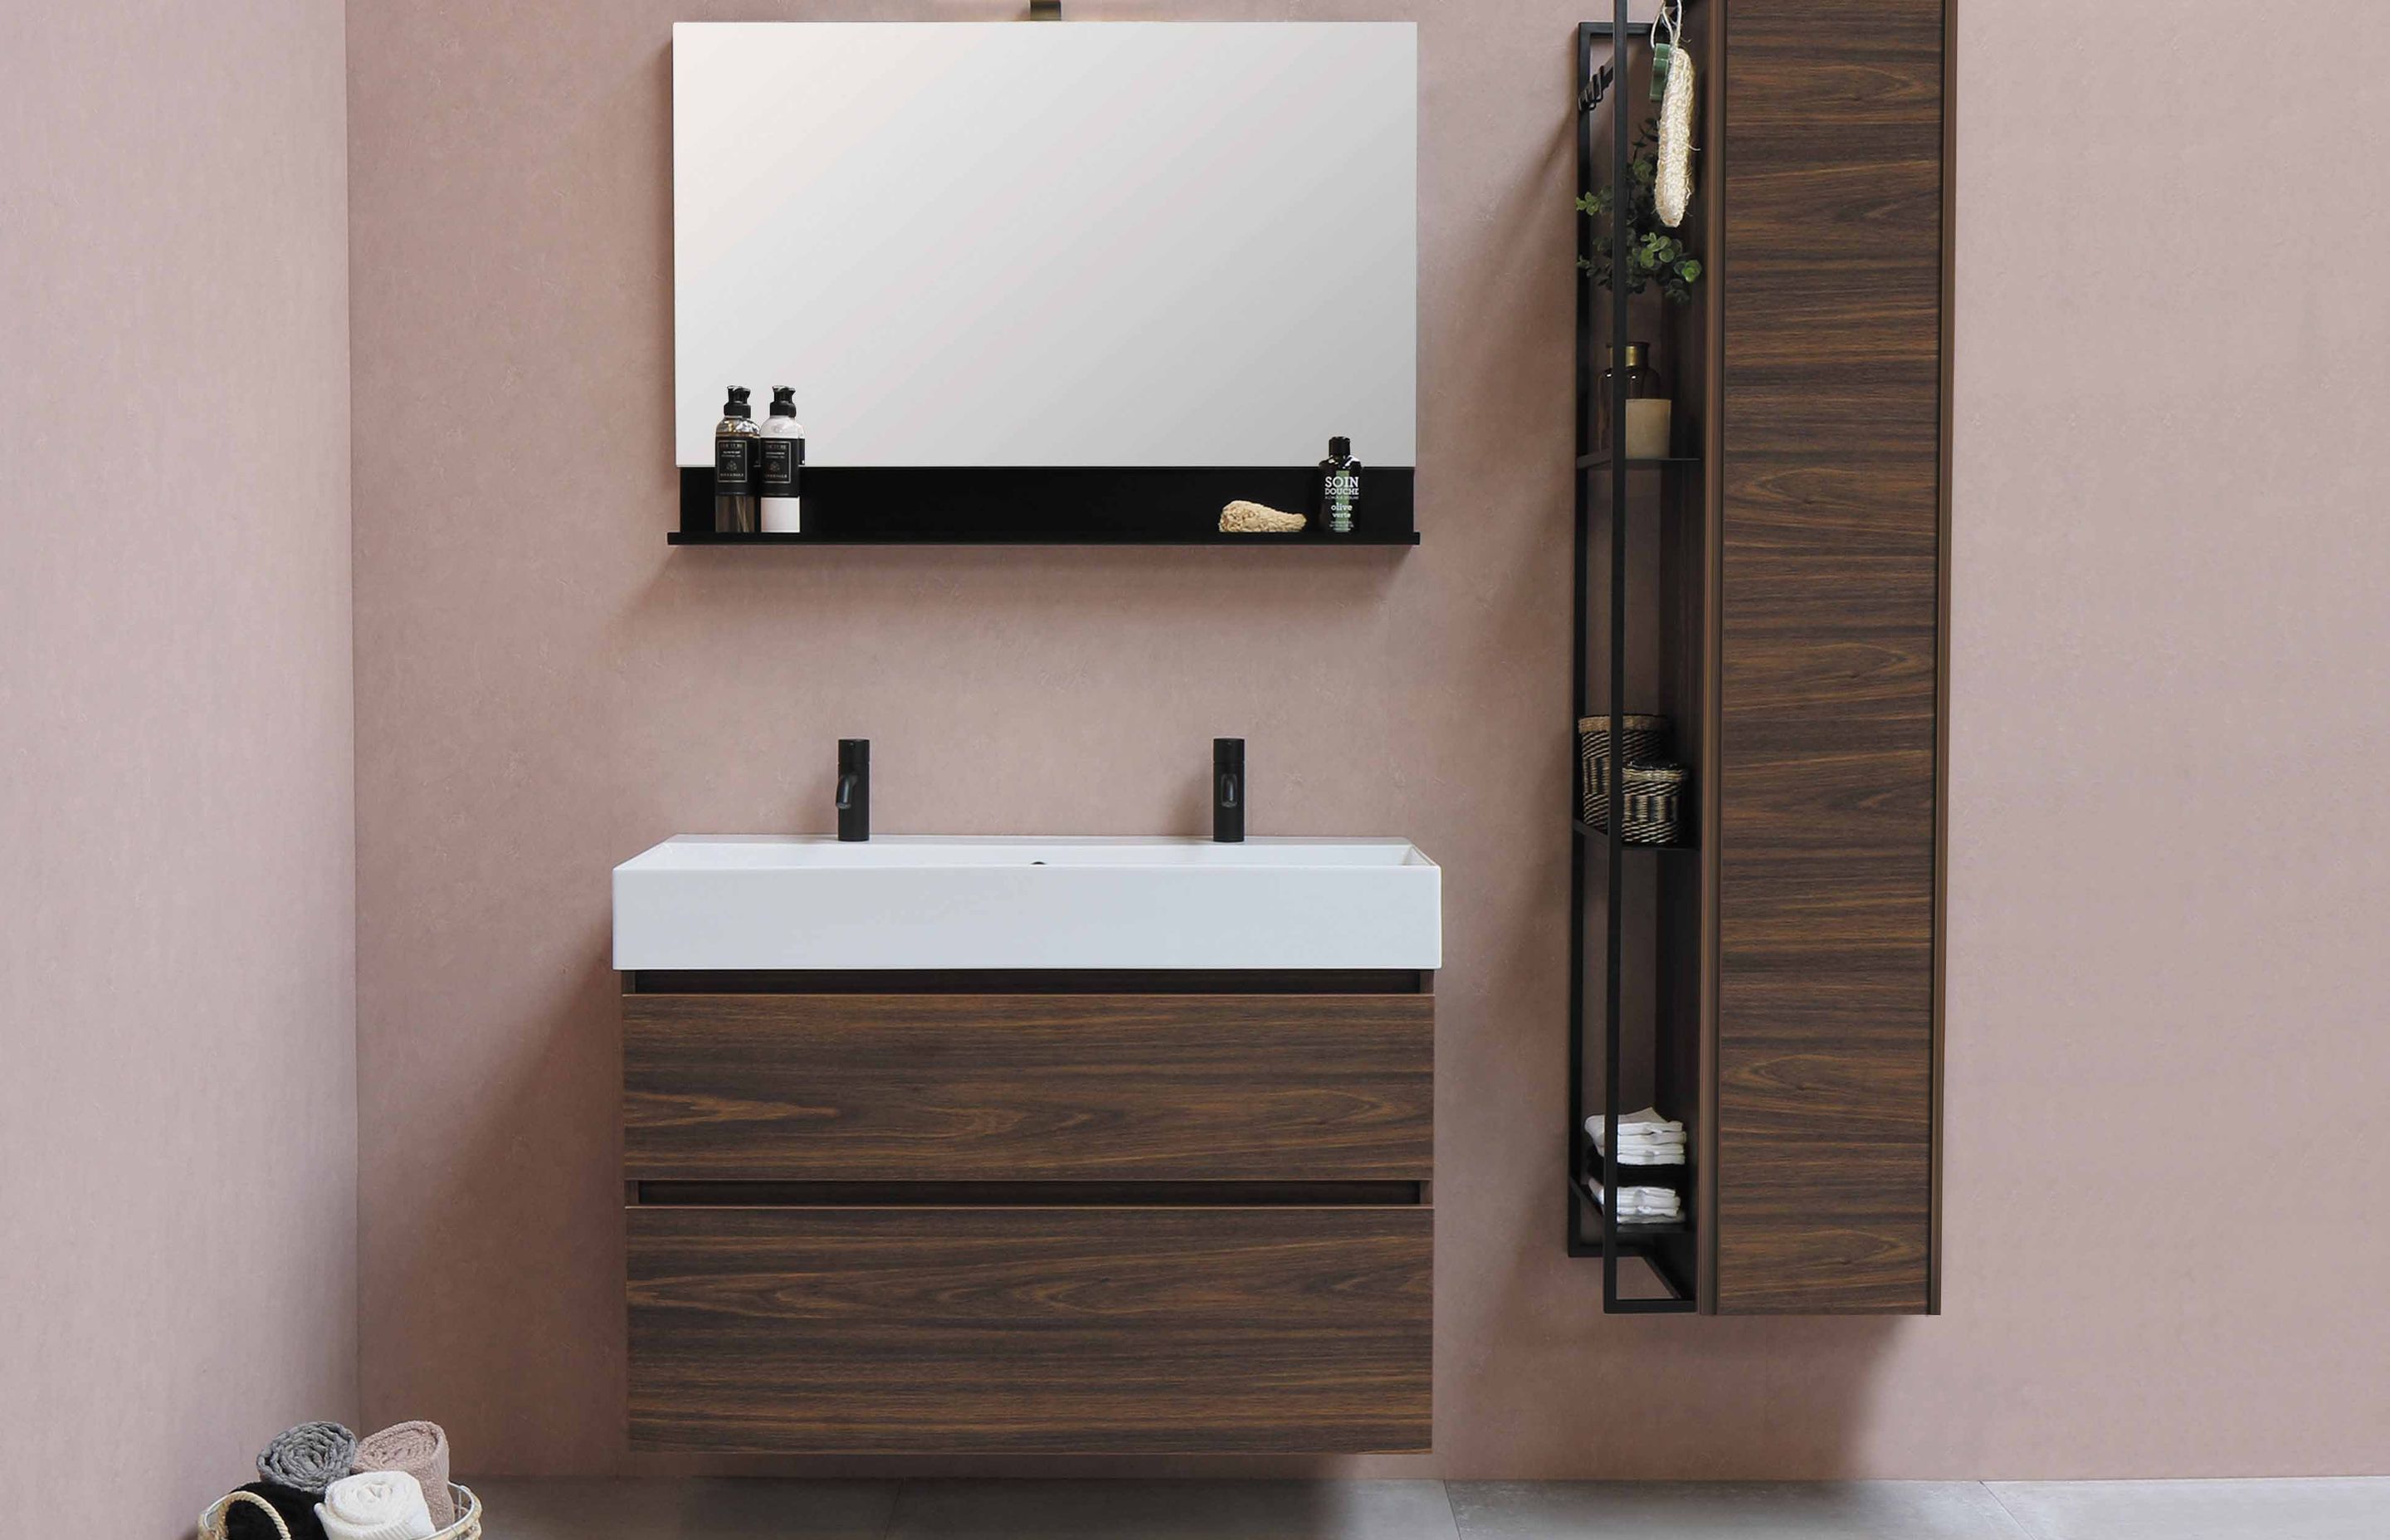 Pink toned bathrooms can transform a bathroom into a clean and modern space